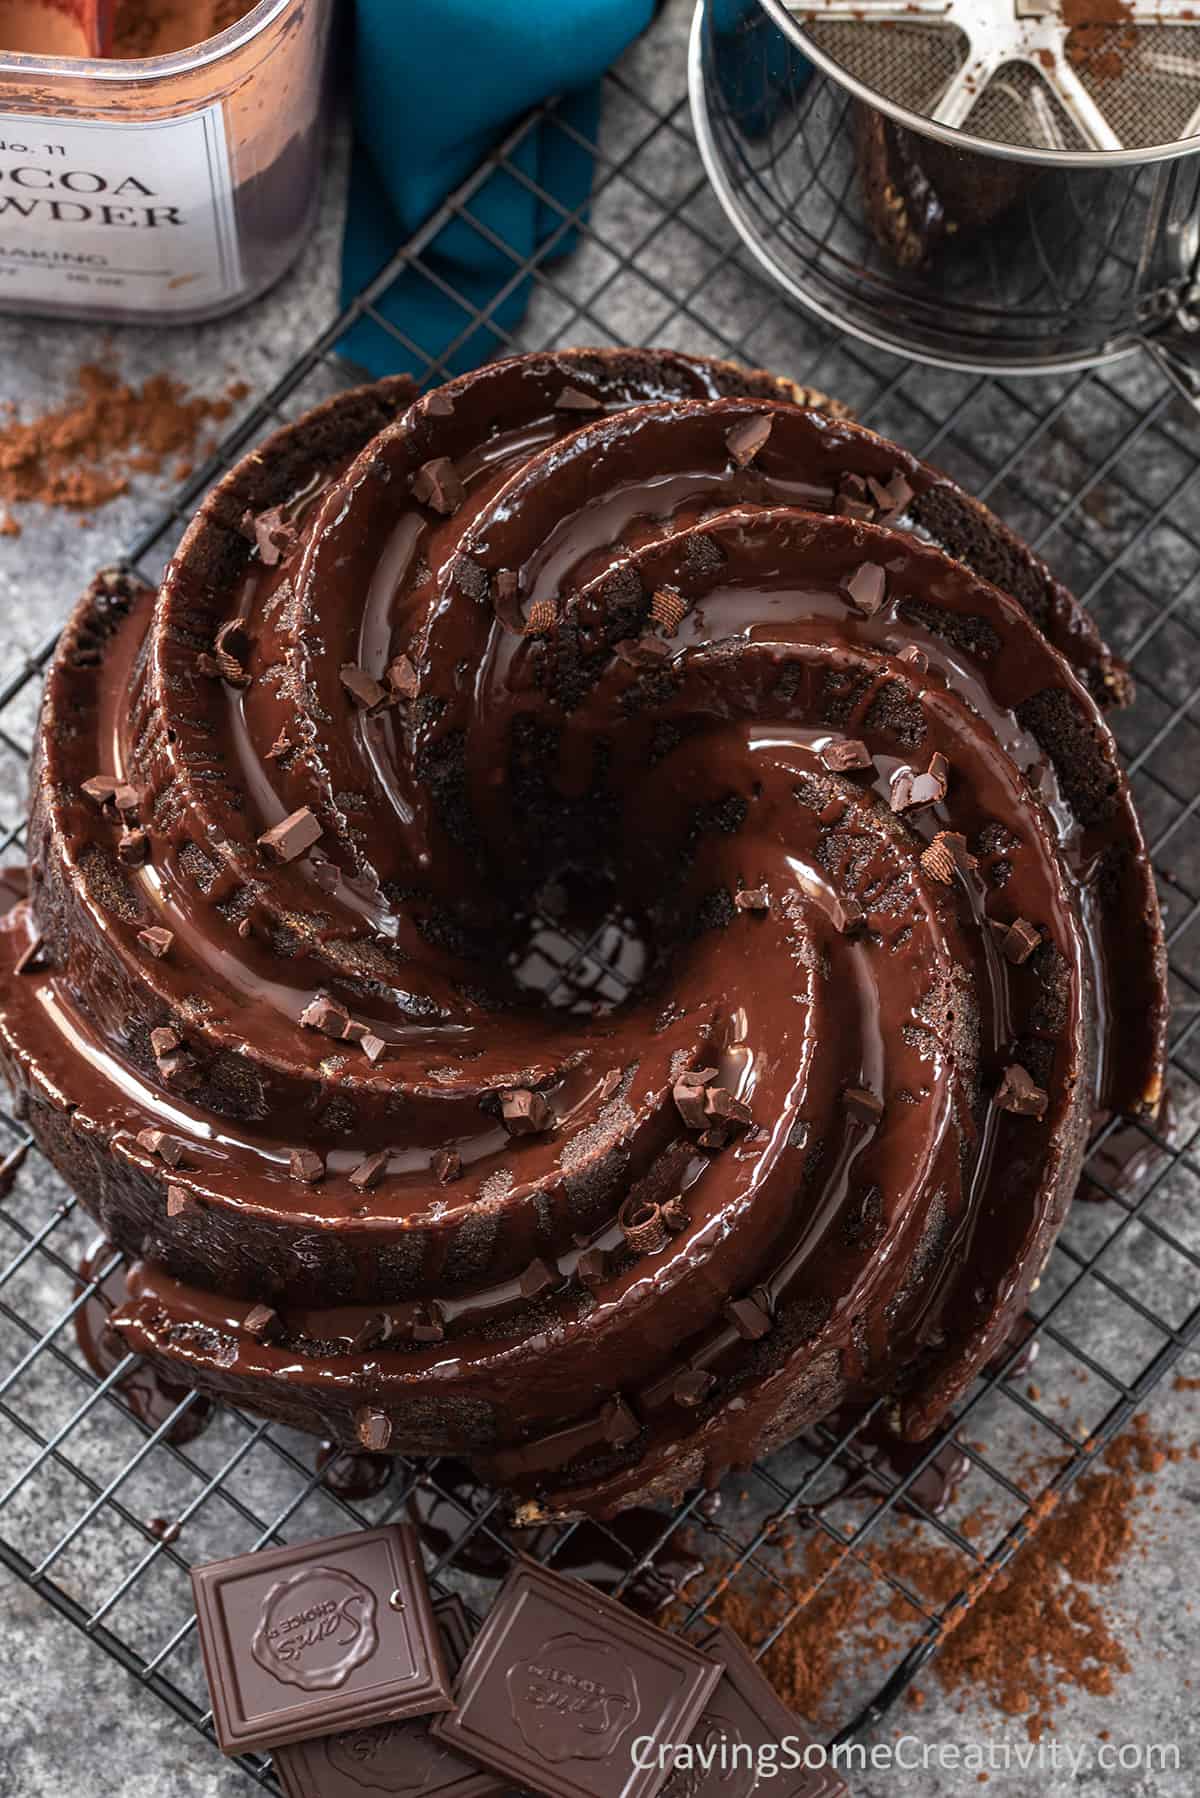 Whole chocolate bundt cake with chocolate ganache drizzle and flakes on a table to cool.